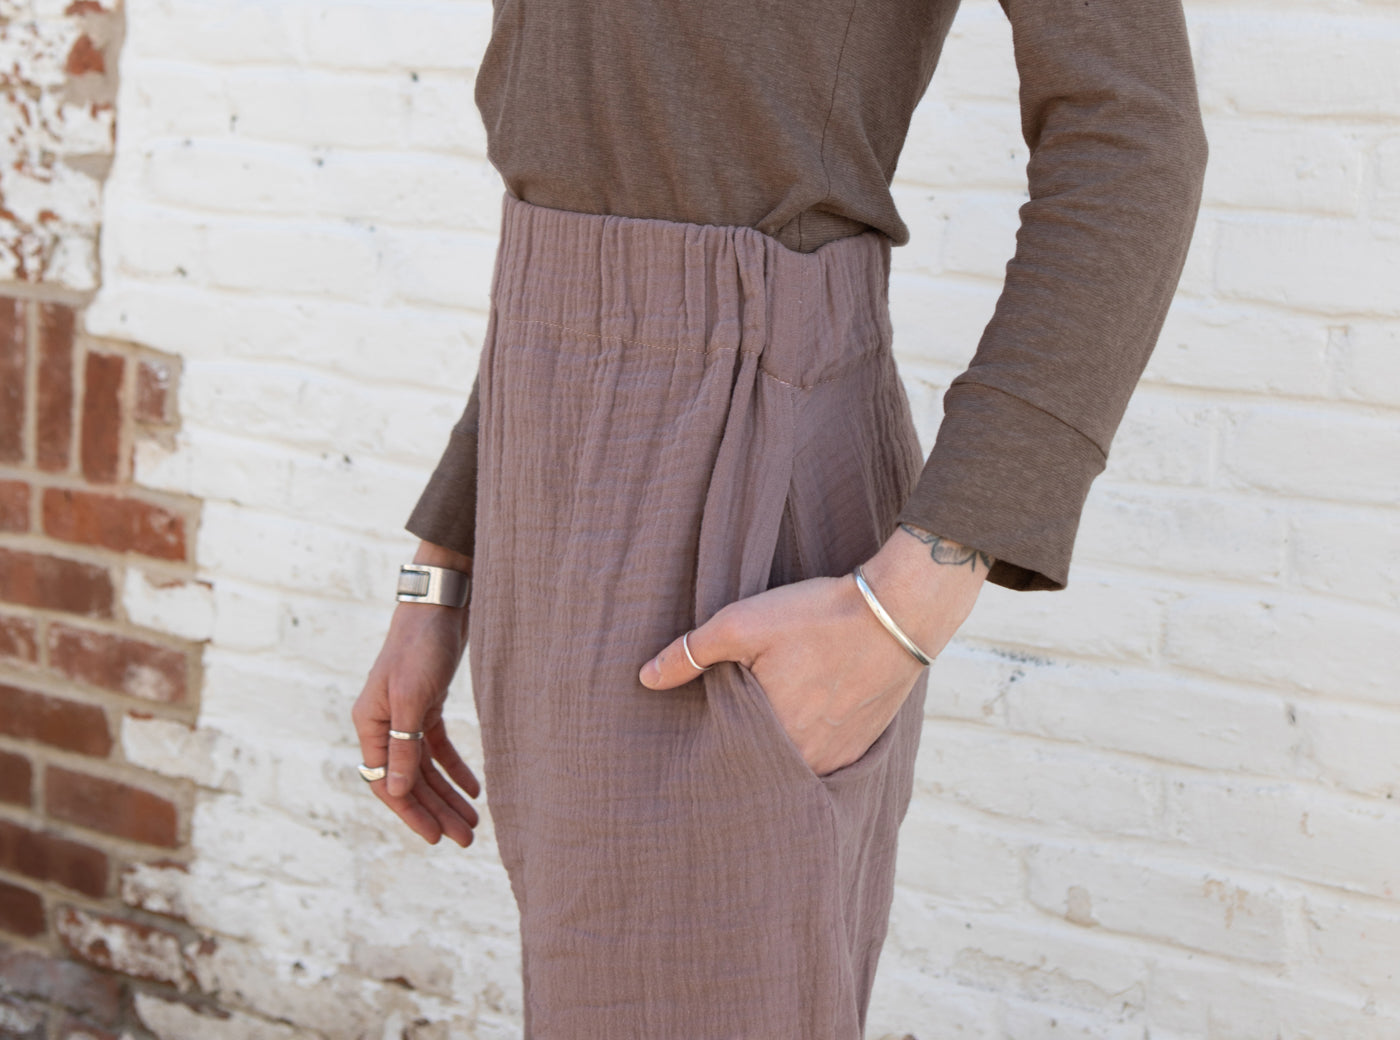 This is an image of a close up of Leaf's Zola Double Gauze in Taupe Free Range Slacks, with their hand placed in one of the side pockets. 